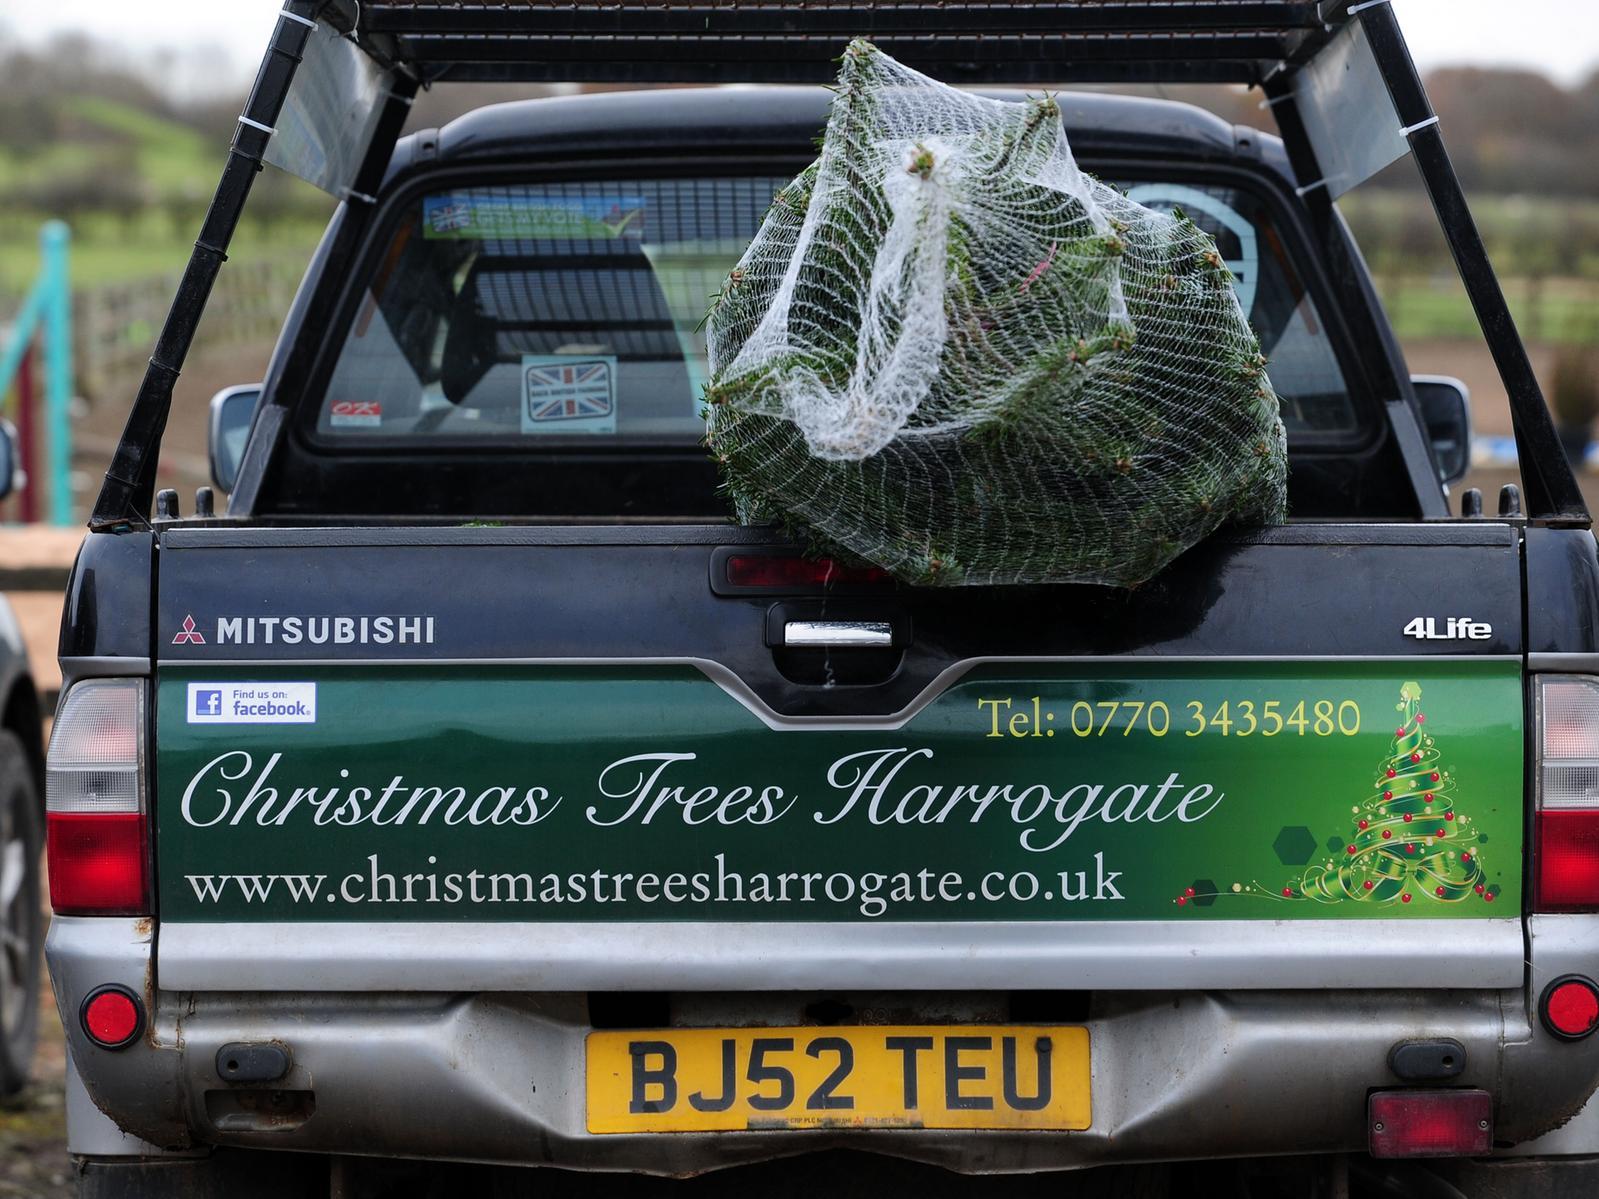 With over 1,000 trees to choose from, Rudfarlington Farm is another popular choice.